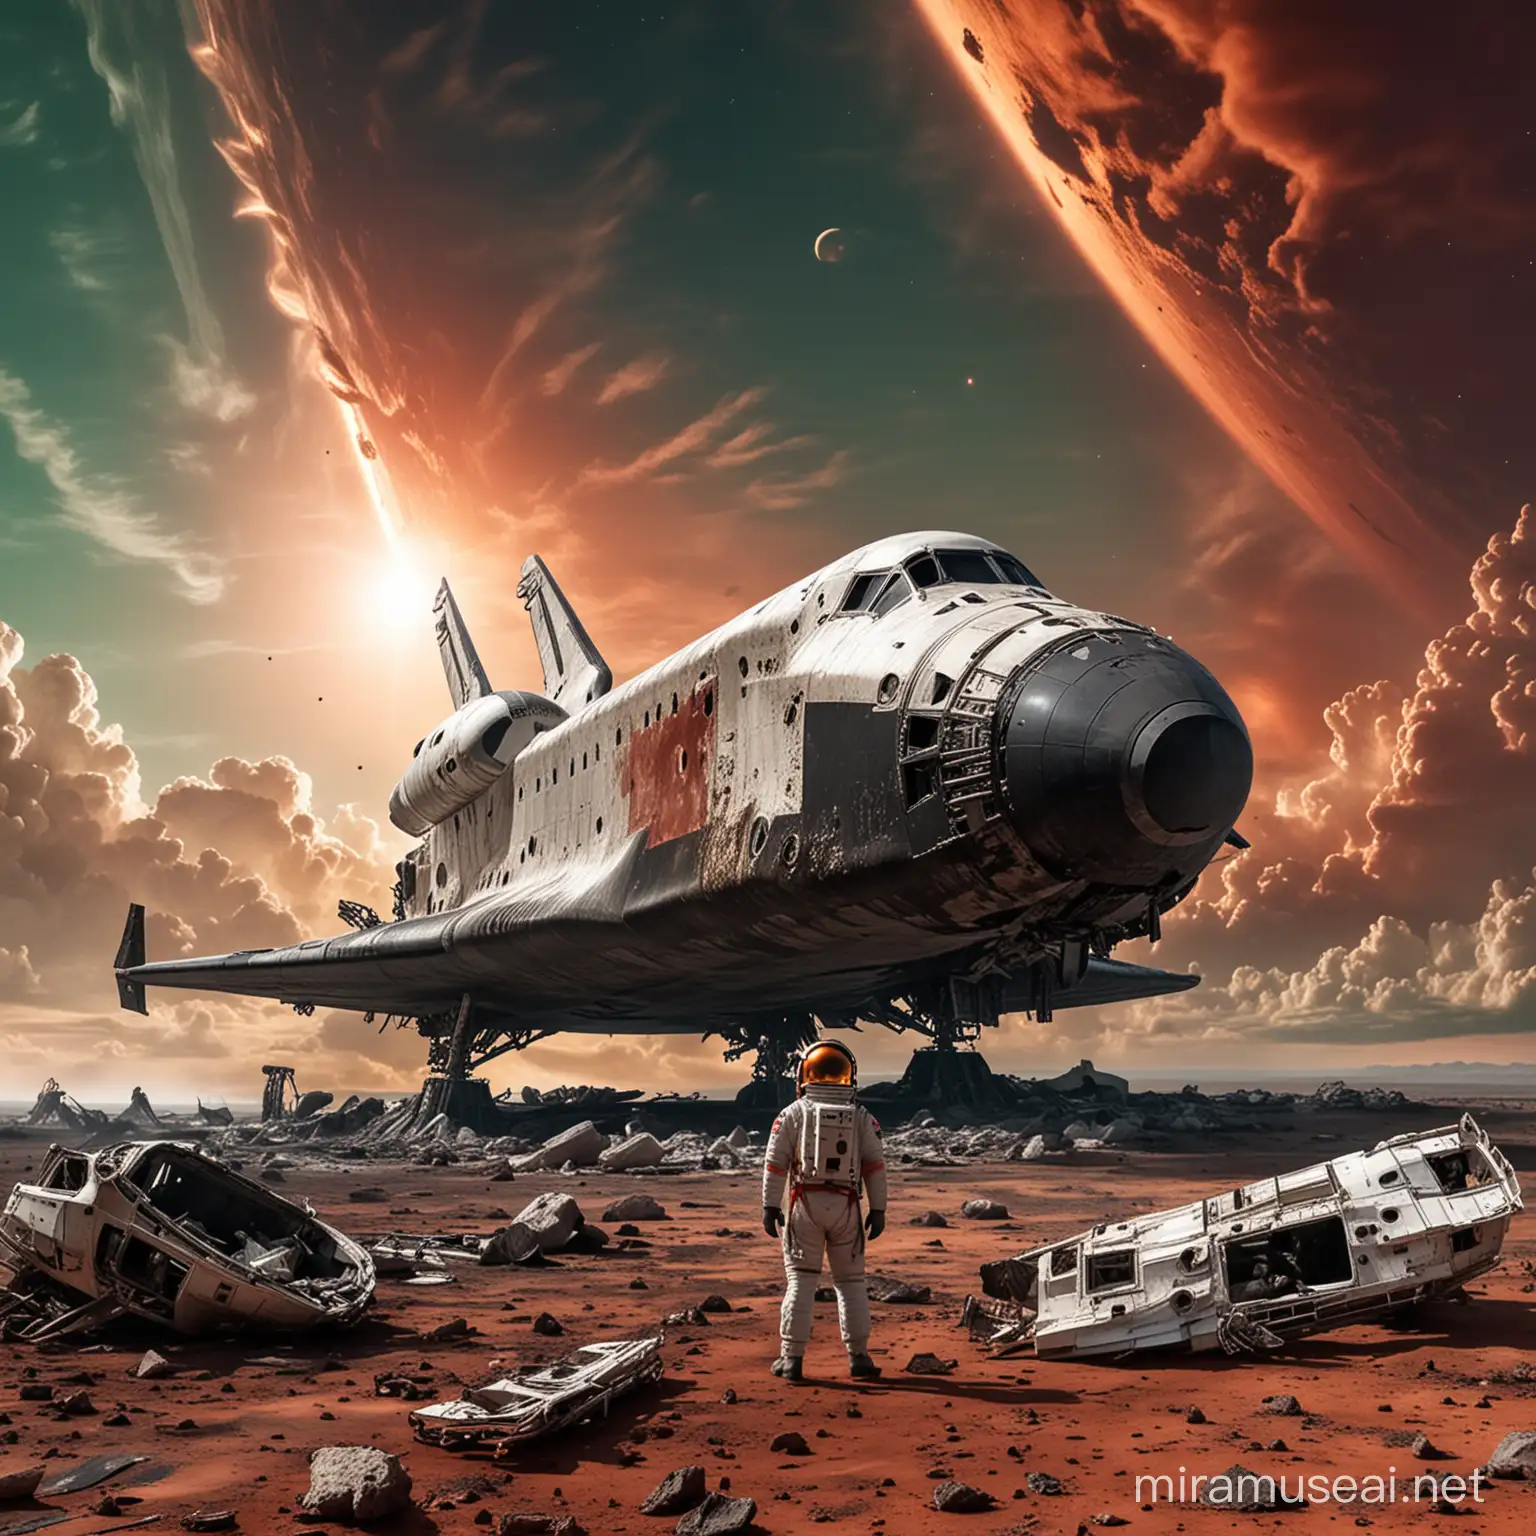 Astronaut beside Damaged Space Shuttle and Alien Craft under Red Sky